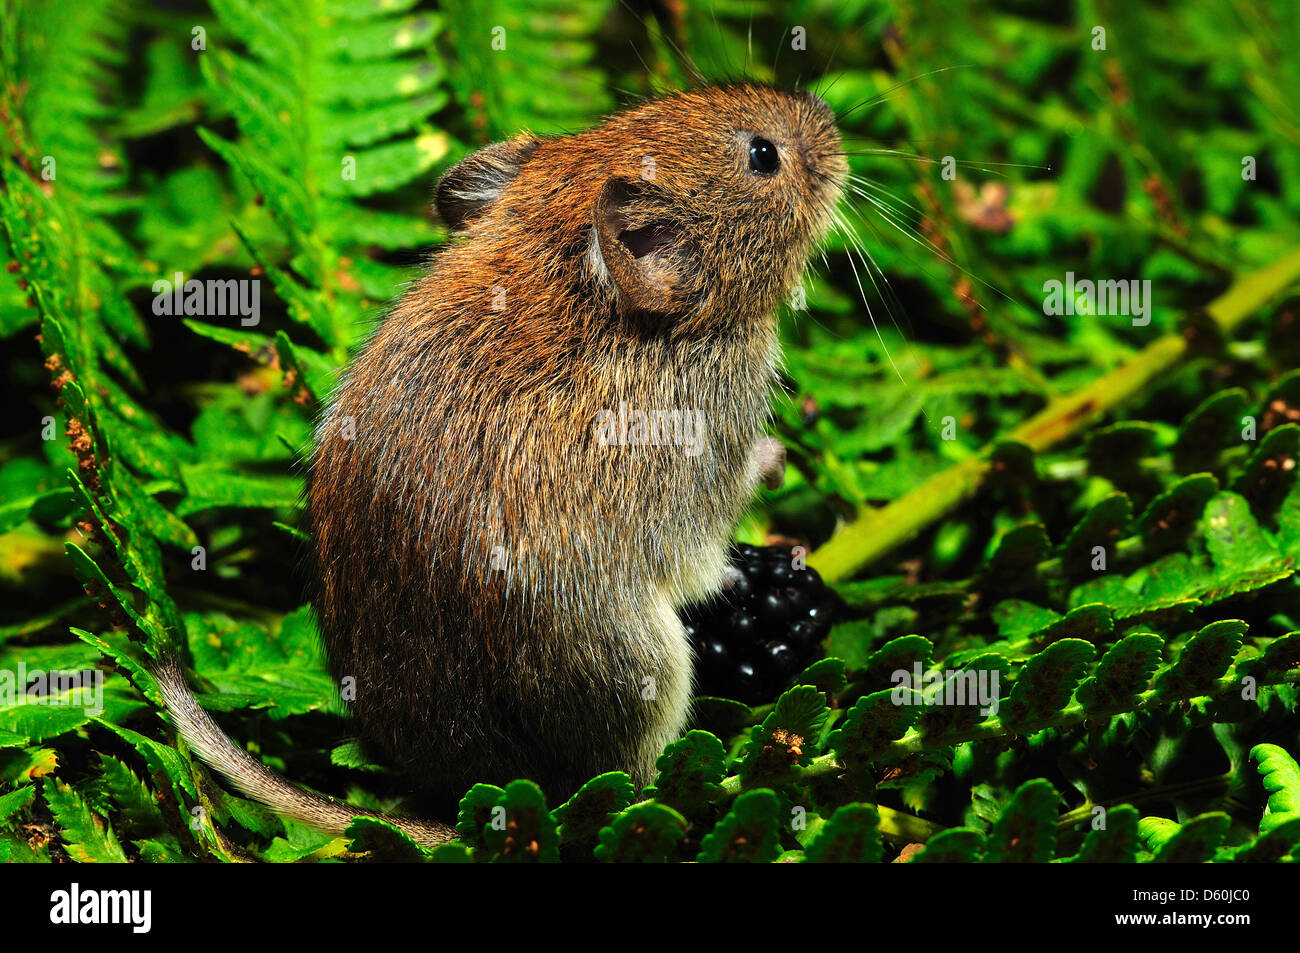 A harvest mouse on a green fern Stock Photo